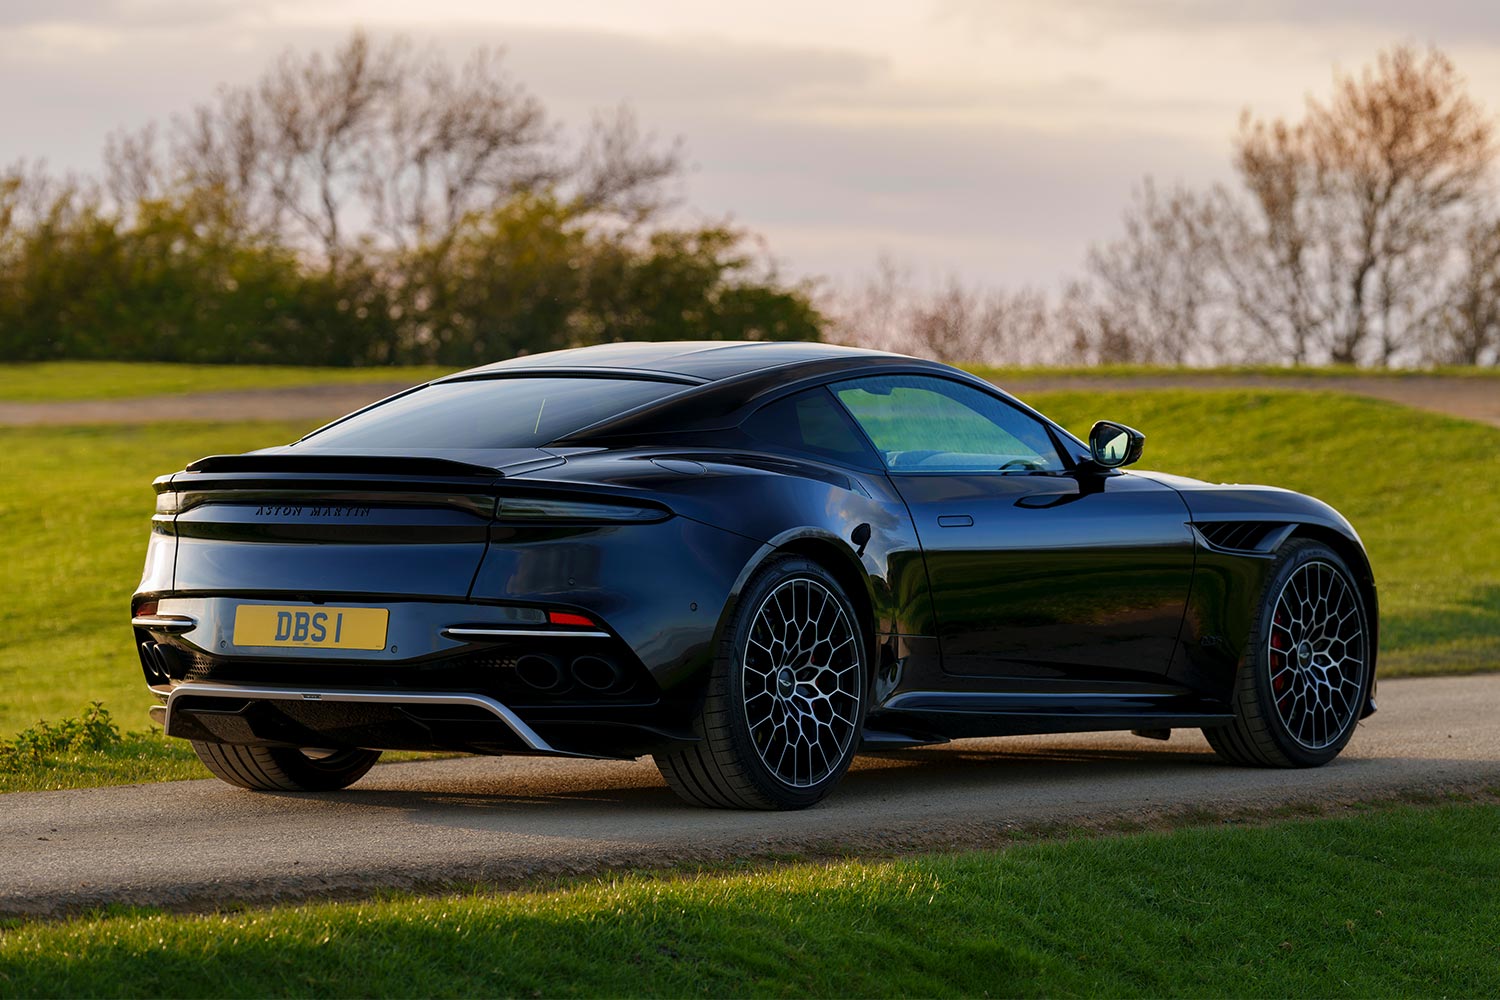 The rear end of the new Aston Martin DBS 770 Ultimate grand tourer